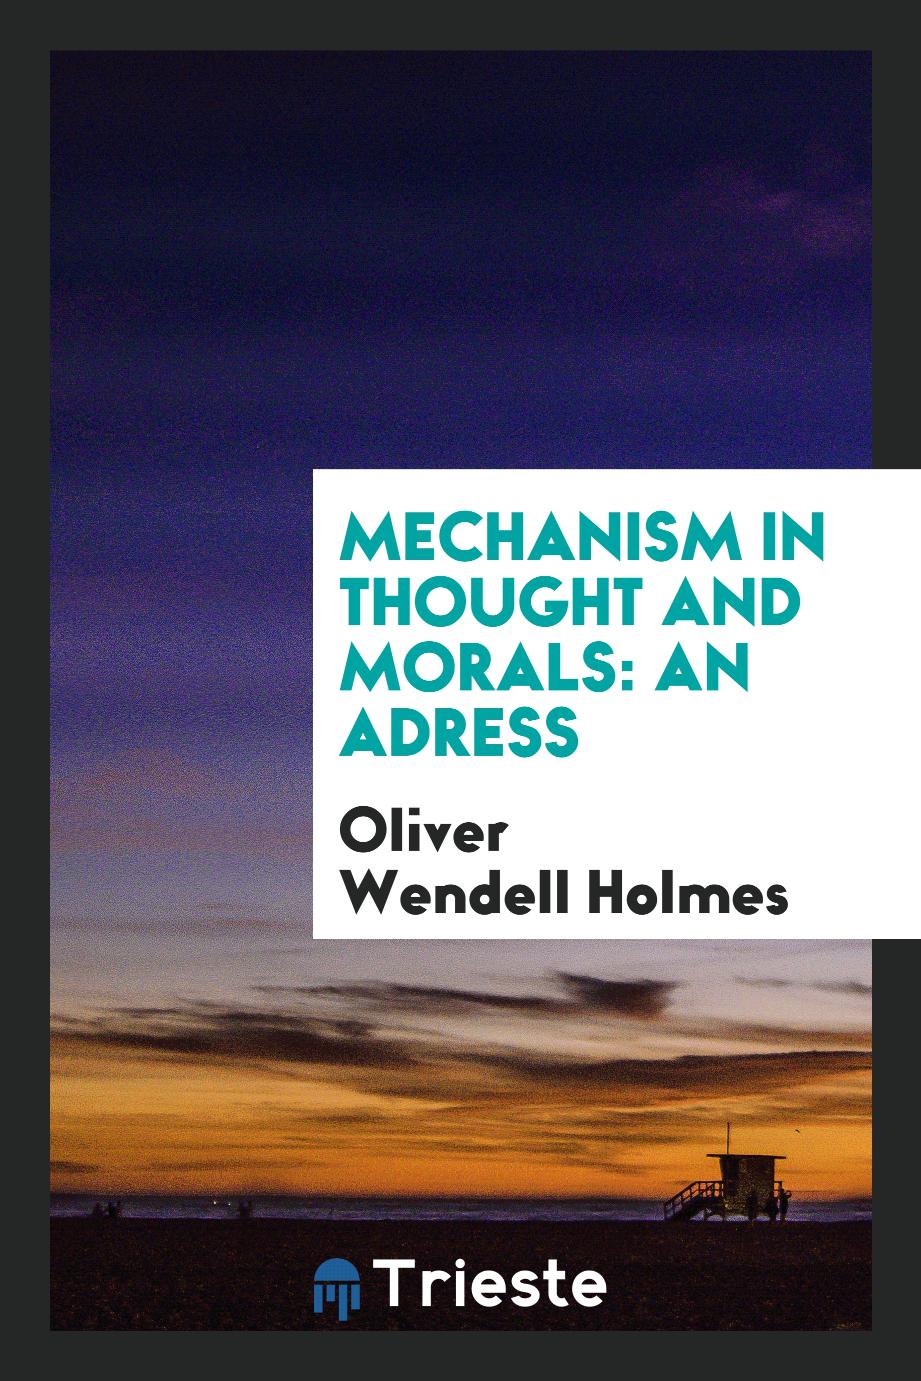 Mechanism in Thought and Morals: An Adress